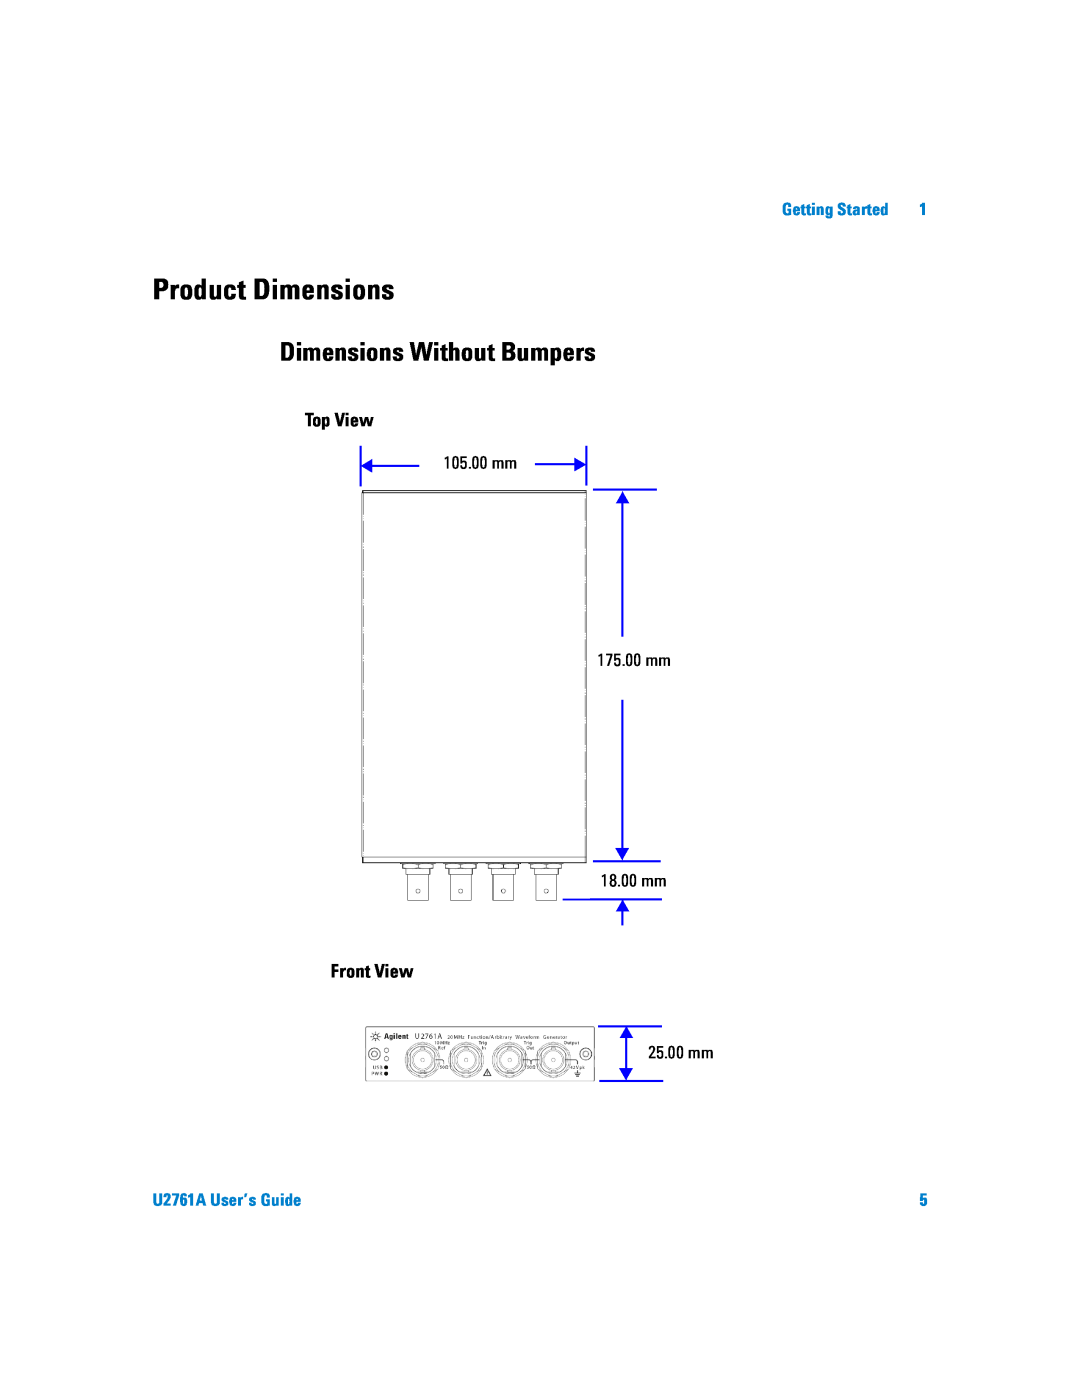 Agilent Technologies manual Product Dimensions, Dimensions Without Bumpers, Top View, Front View, U2761A User’s Guide 